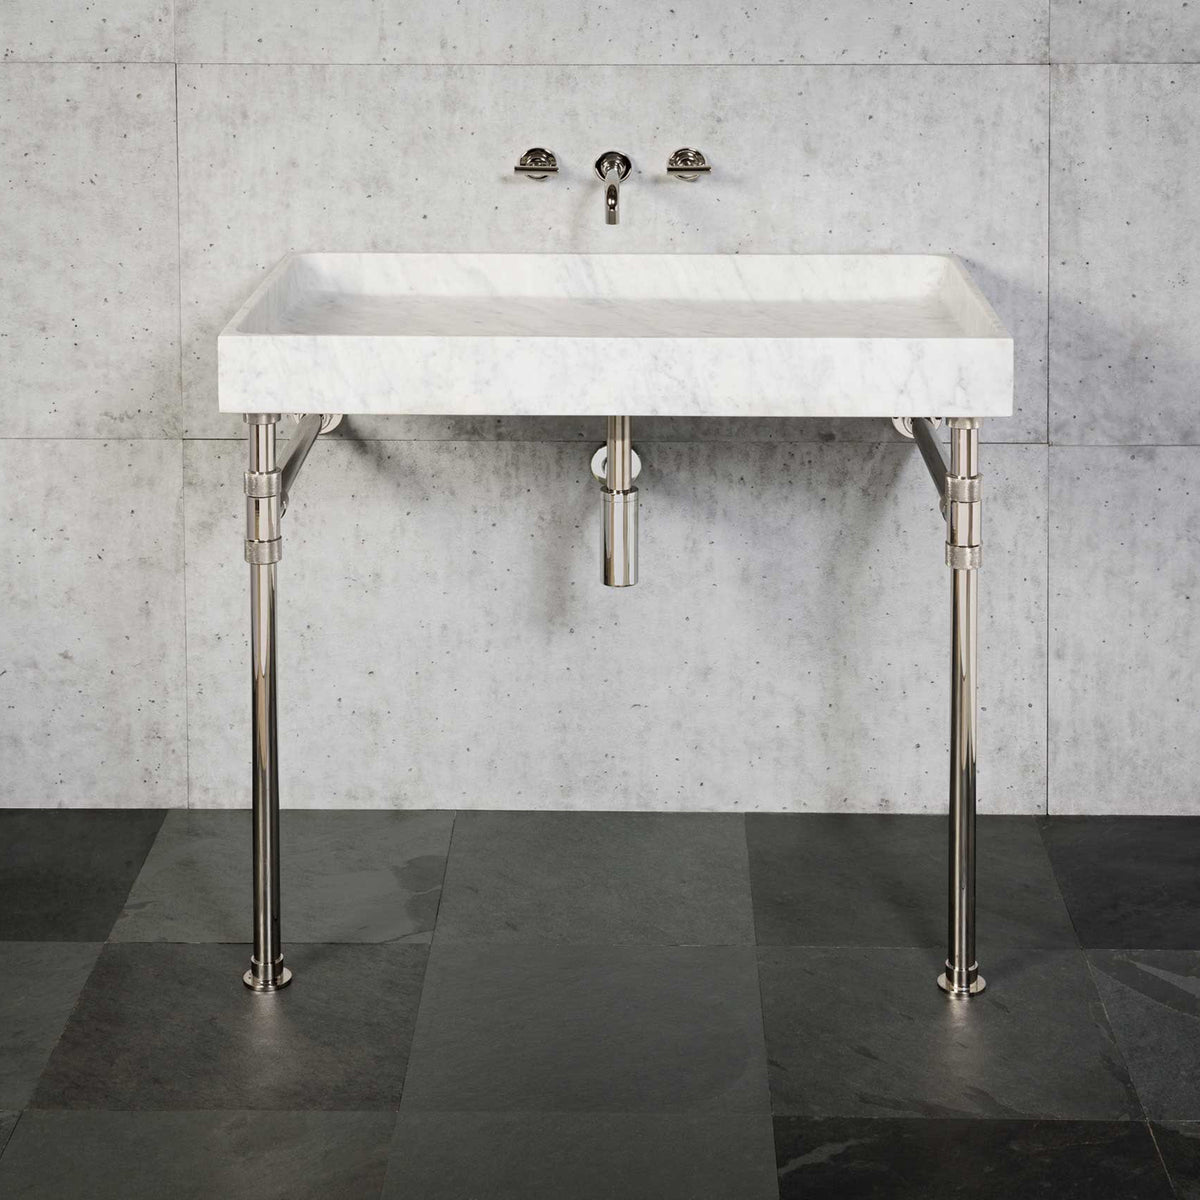 Ventus Bath Sink with Folded Metal Tray, Stone Forest